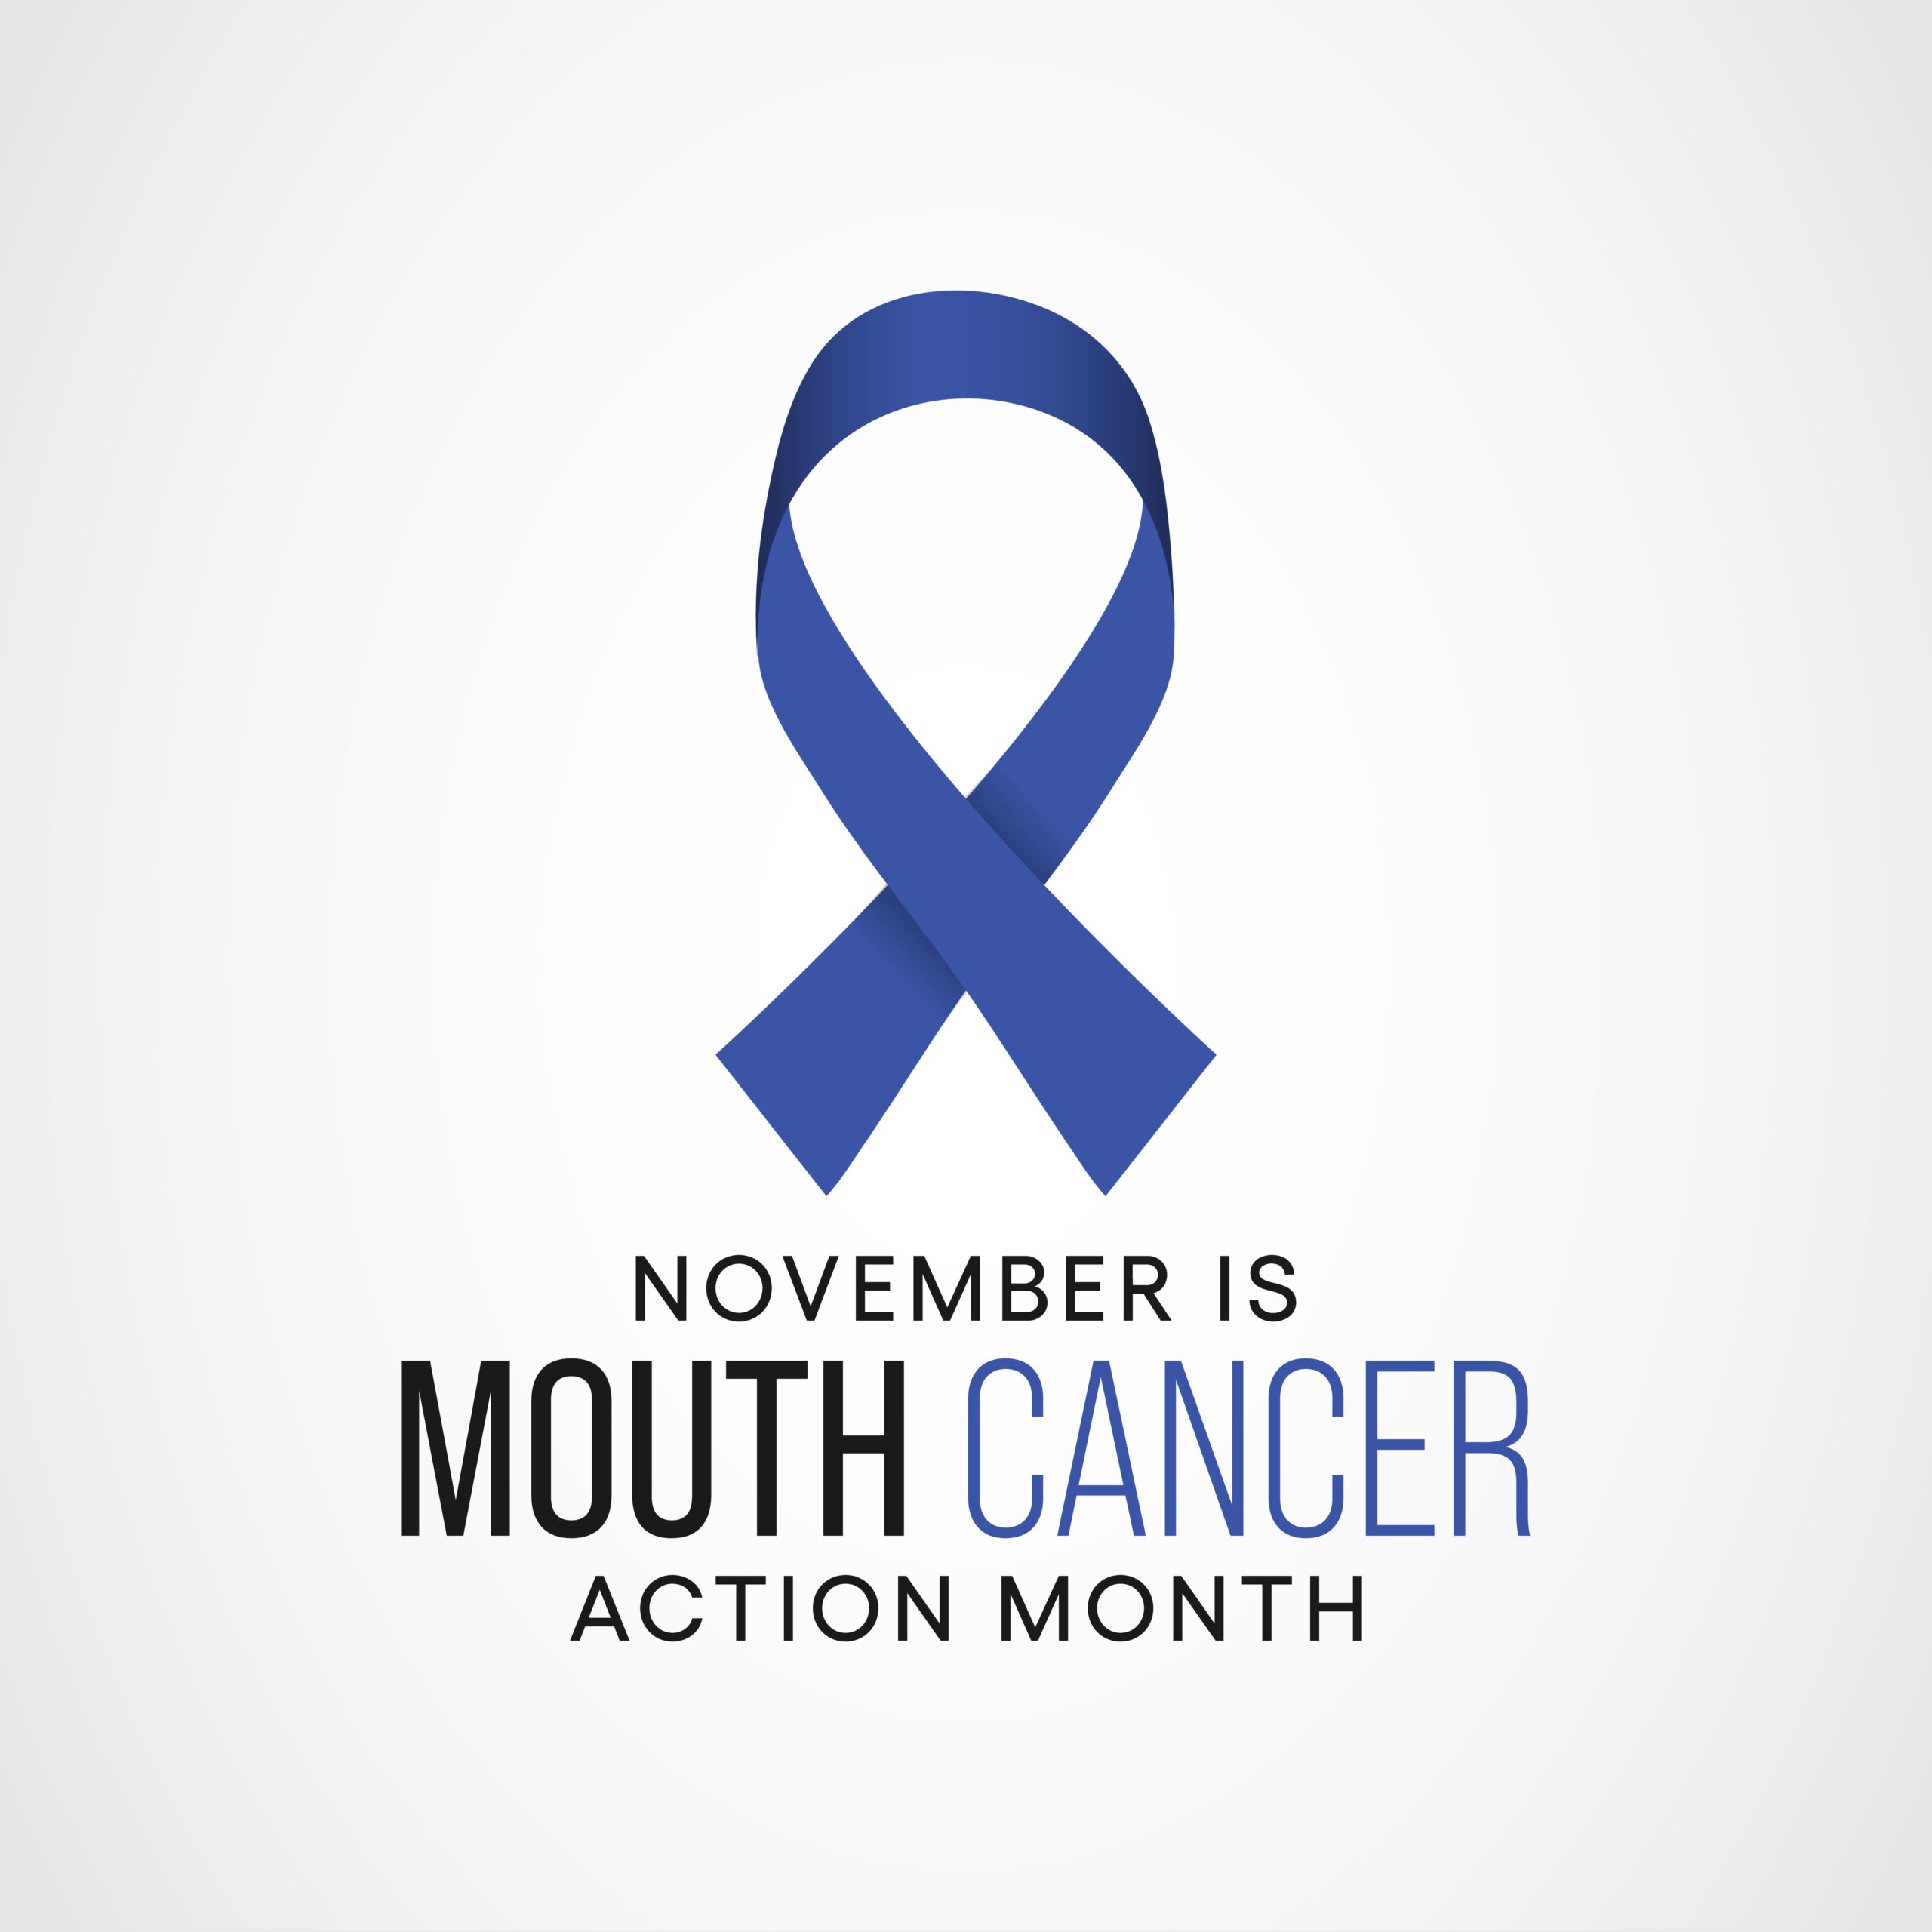 Mouth cancer action month and oral screenings